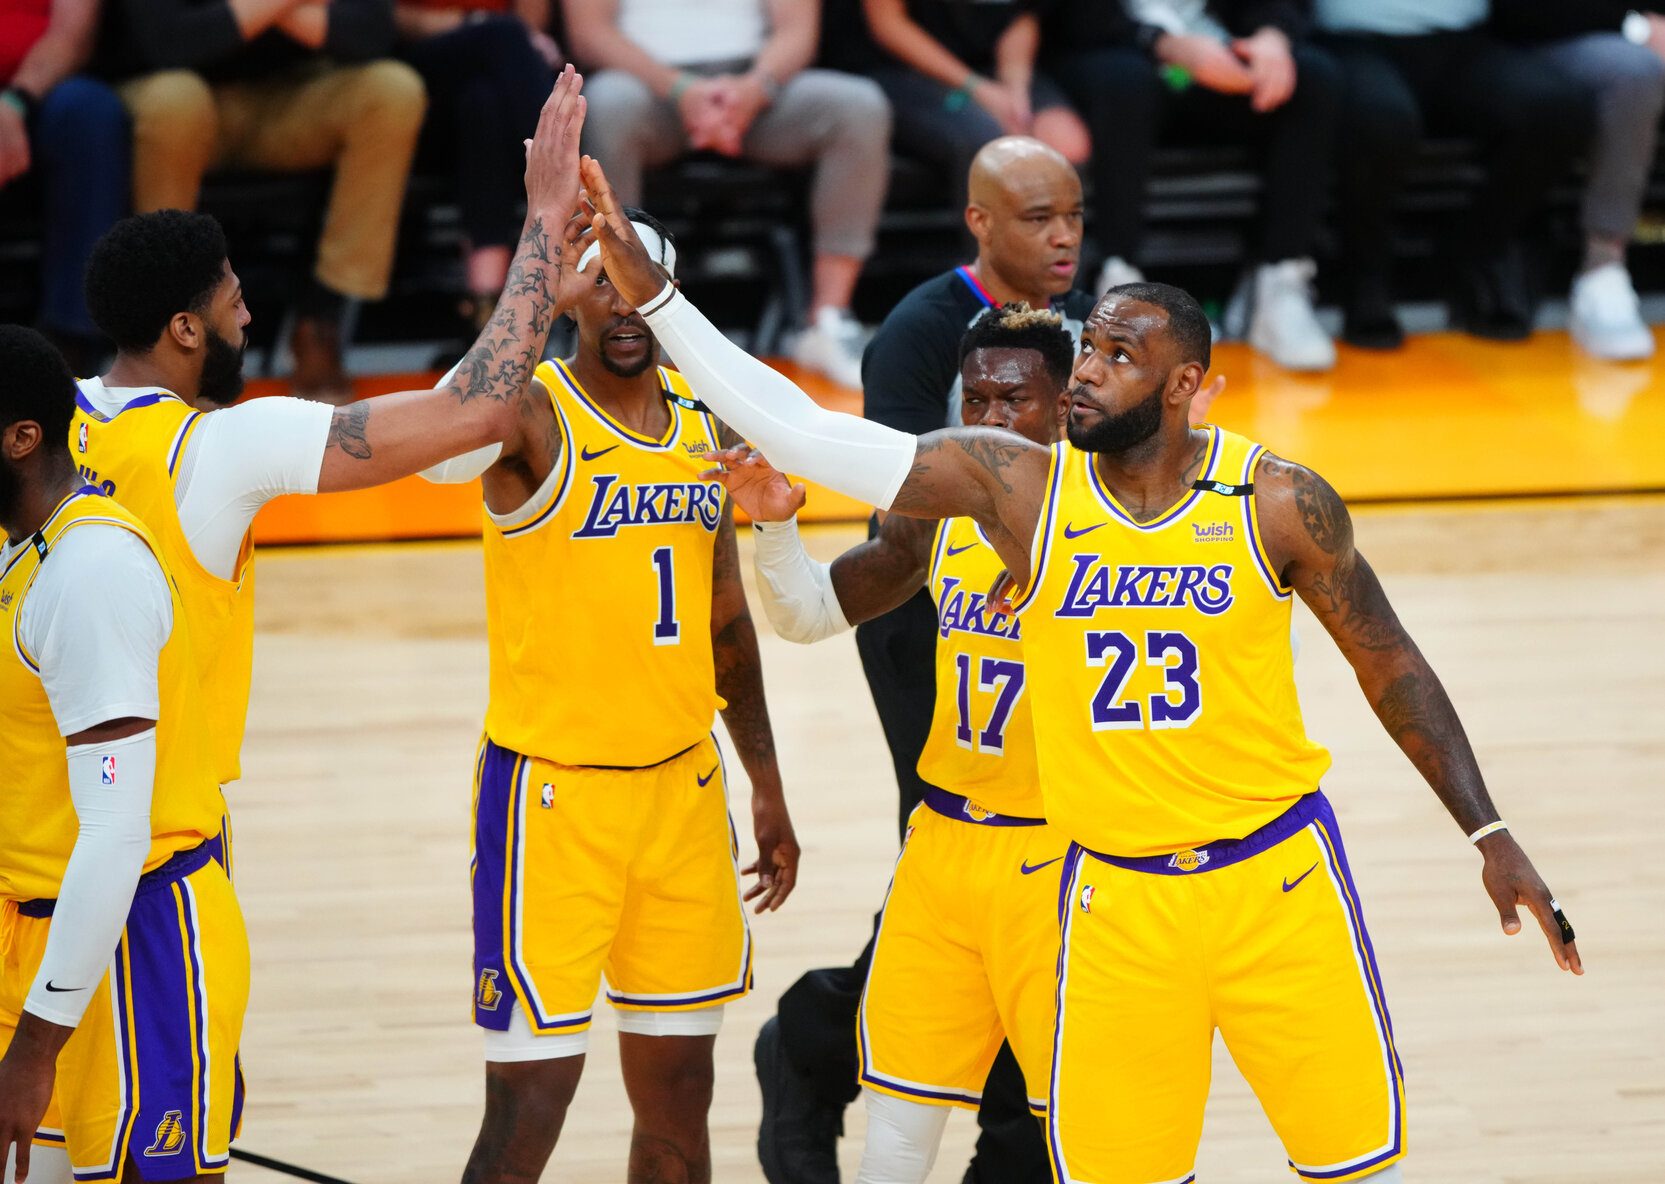 How the Lakers won the advantage game against the Suns